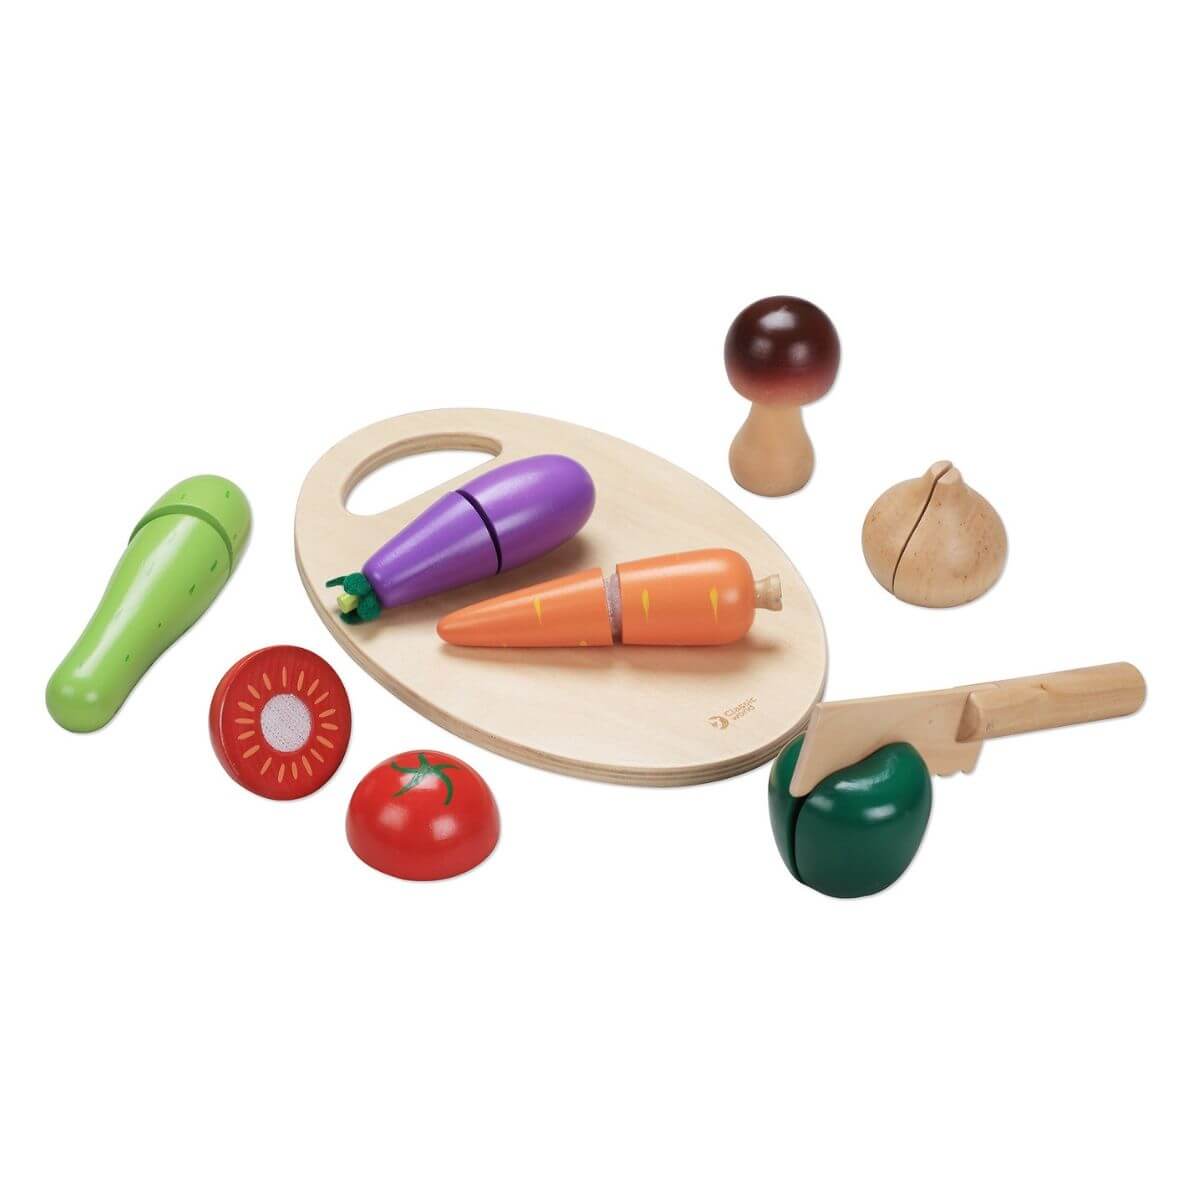 Classic World Wooden Vegetable Cutting Set